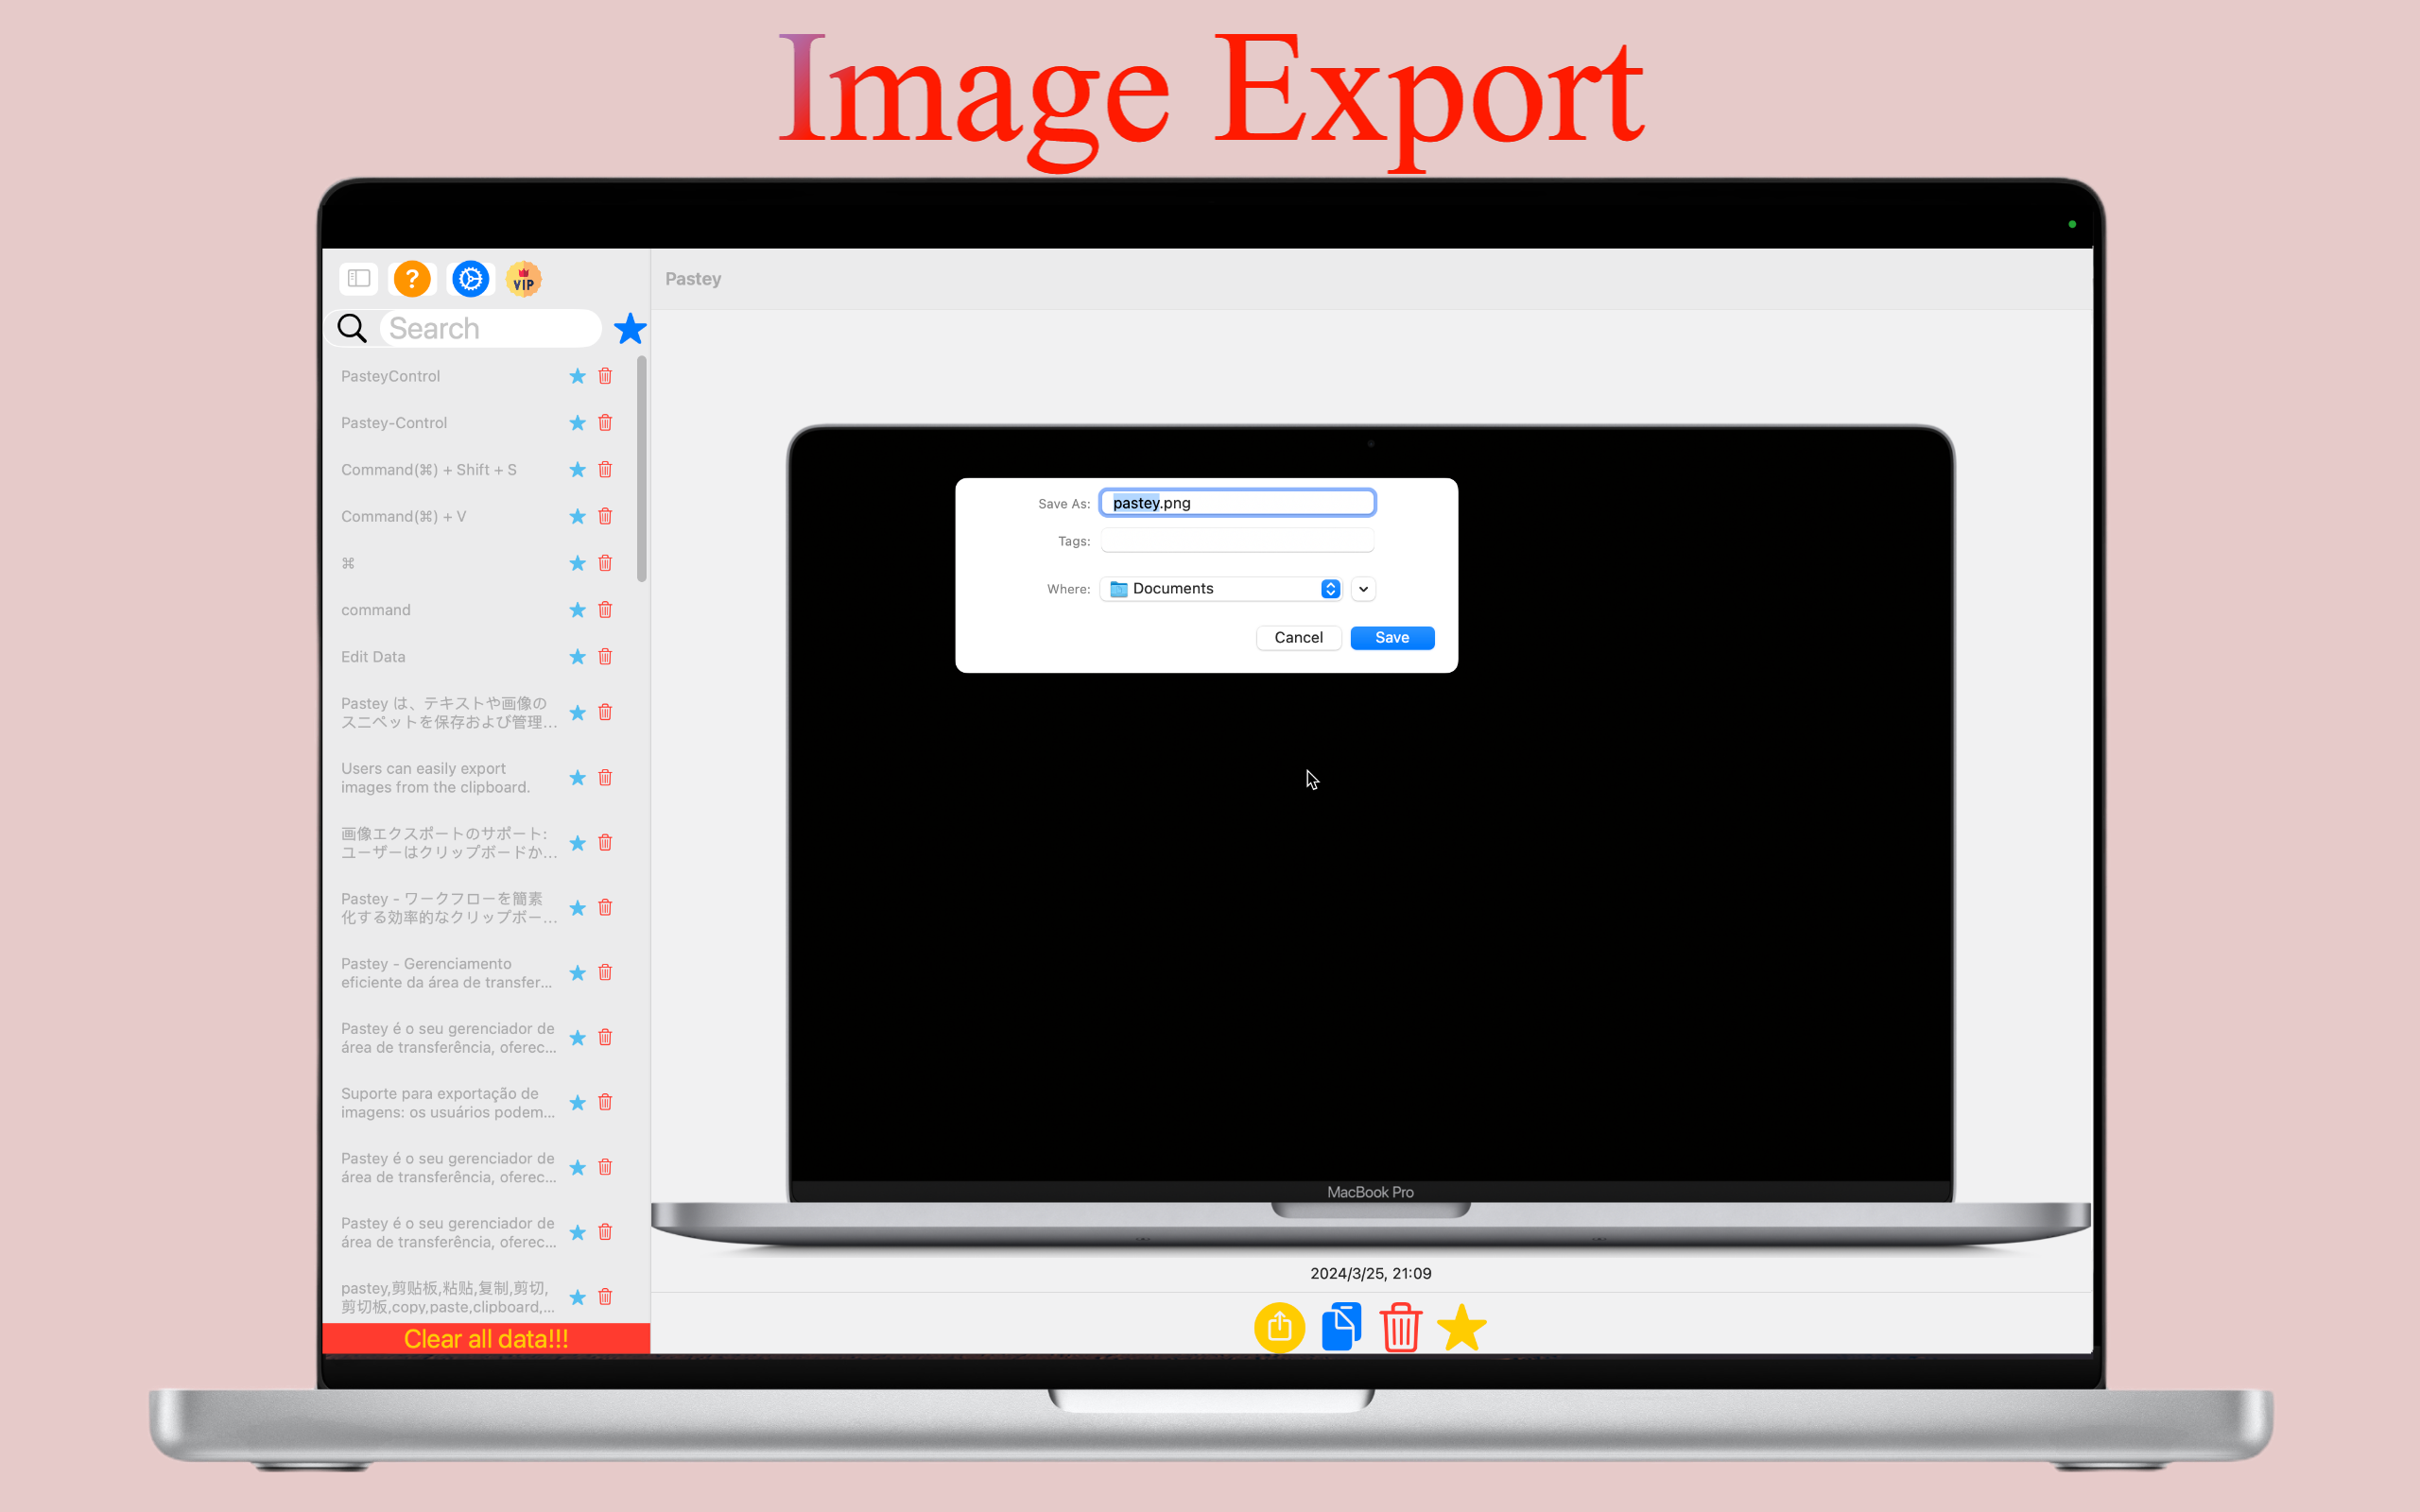 Image Export Support: Expanding Clipboard Functionality